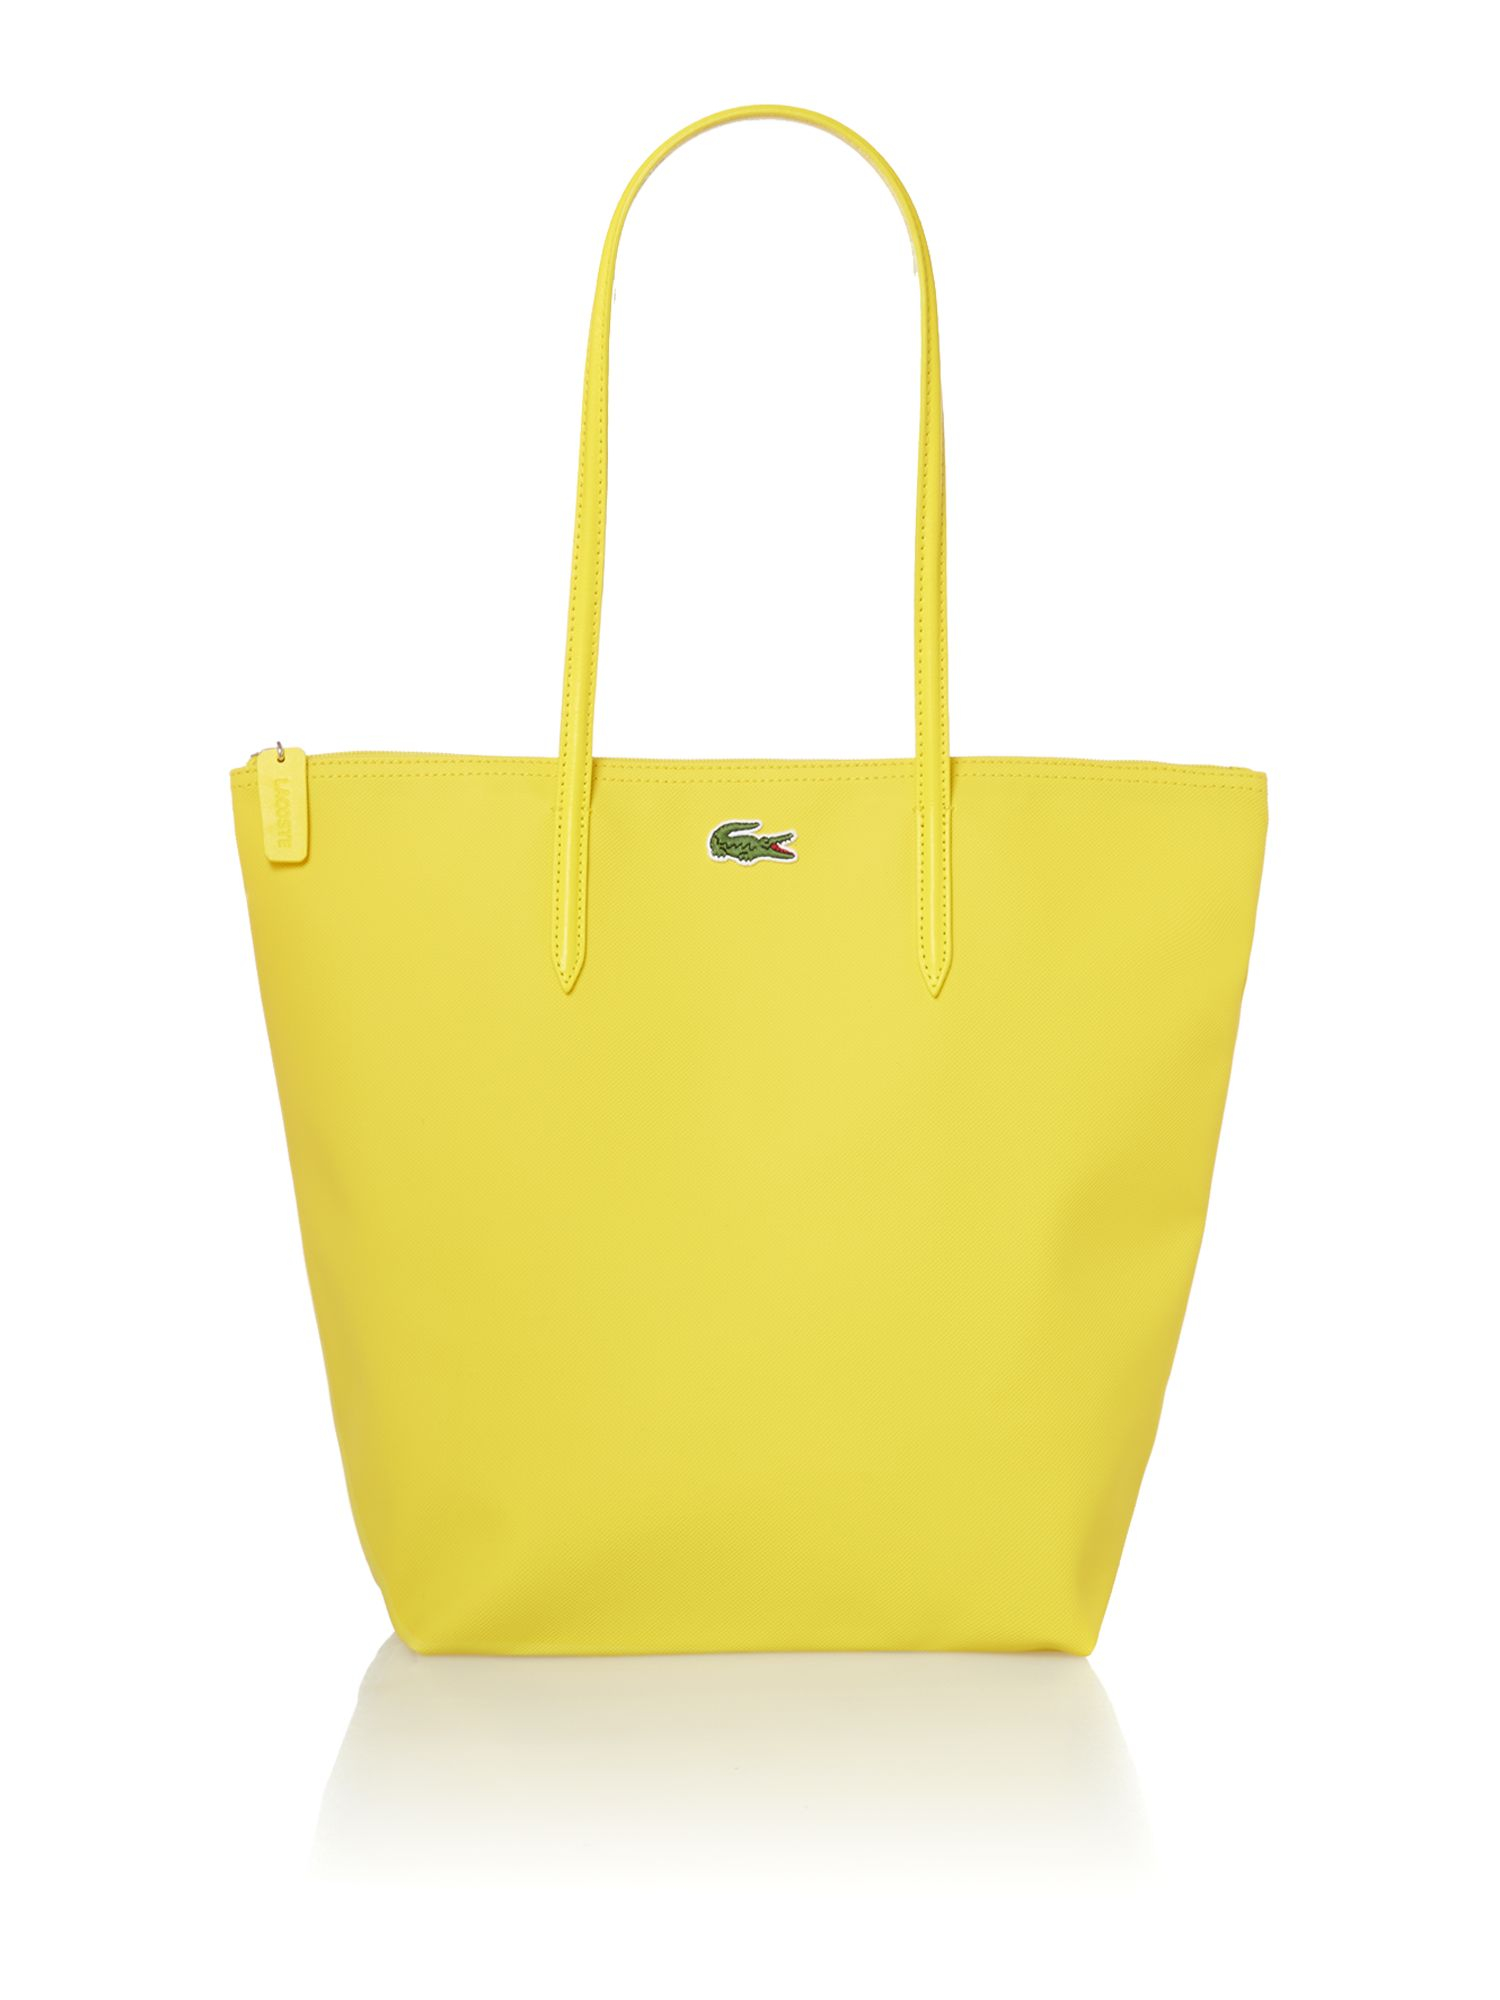 Lacoste Yellow Tote Bag in Yellow | Lyst